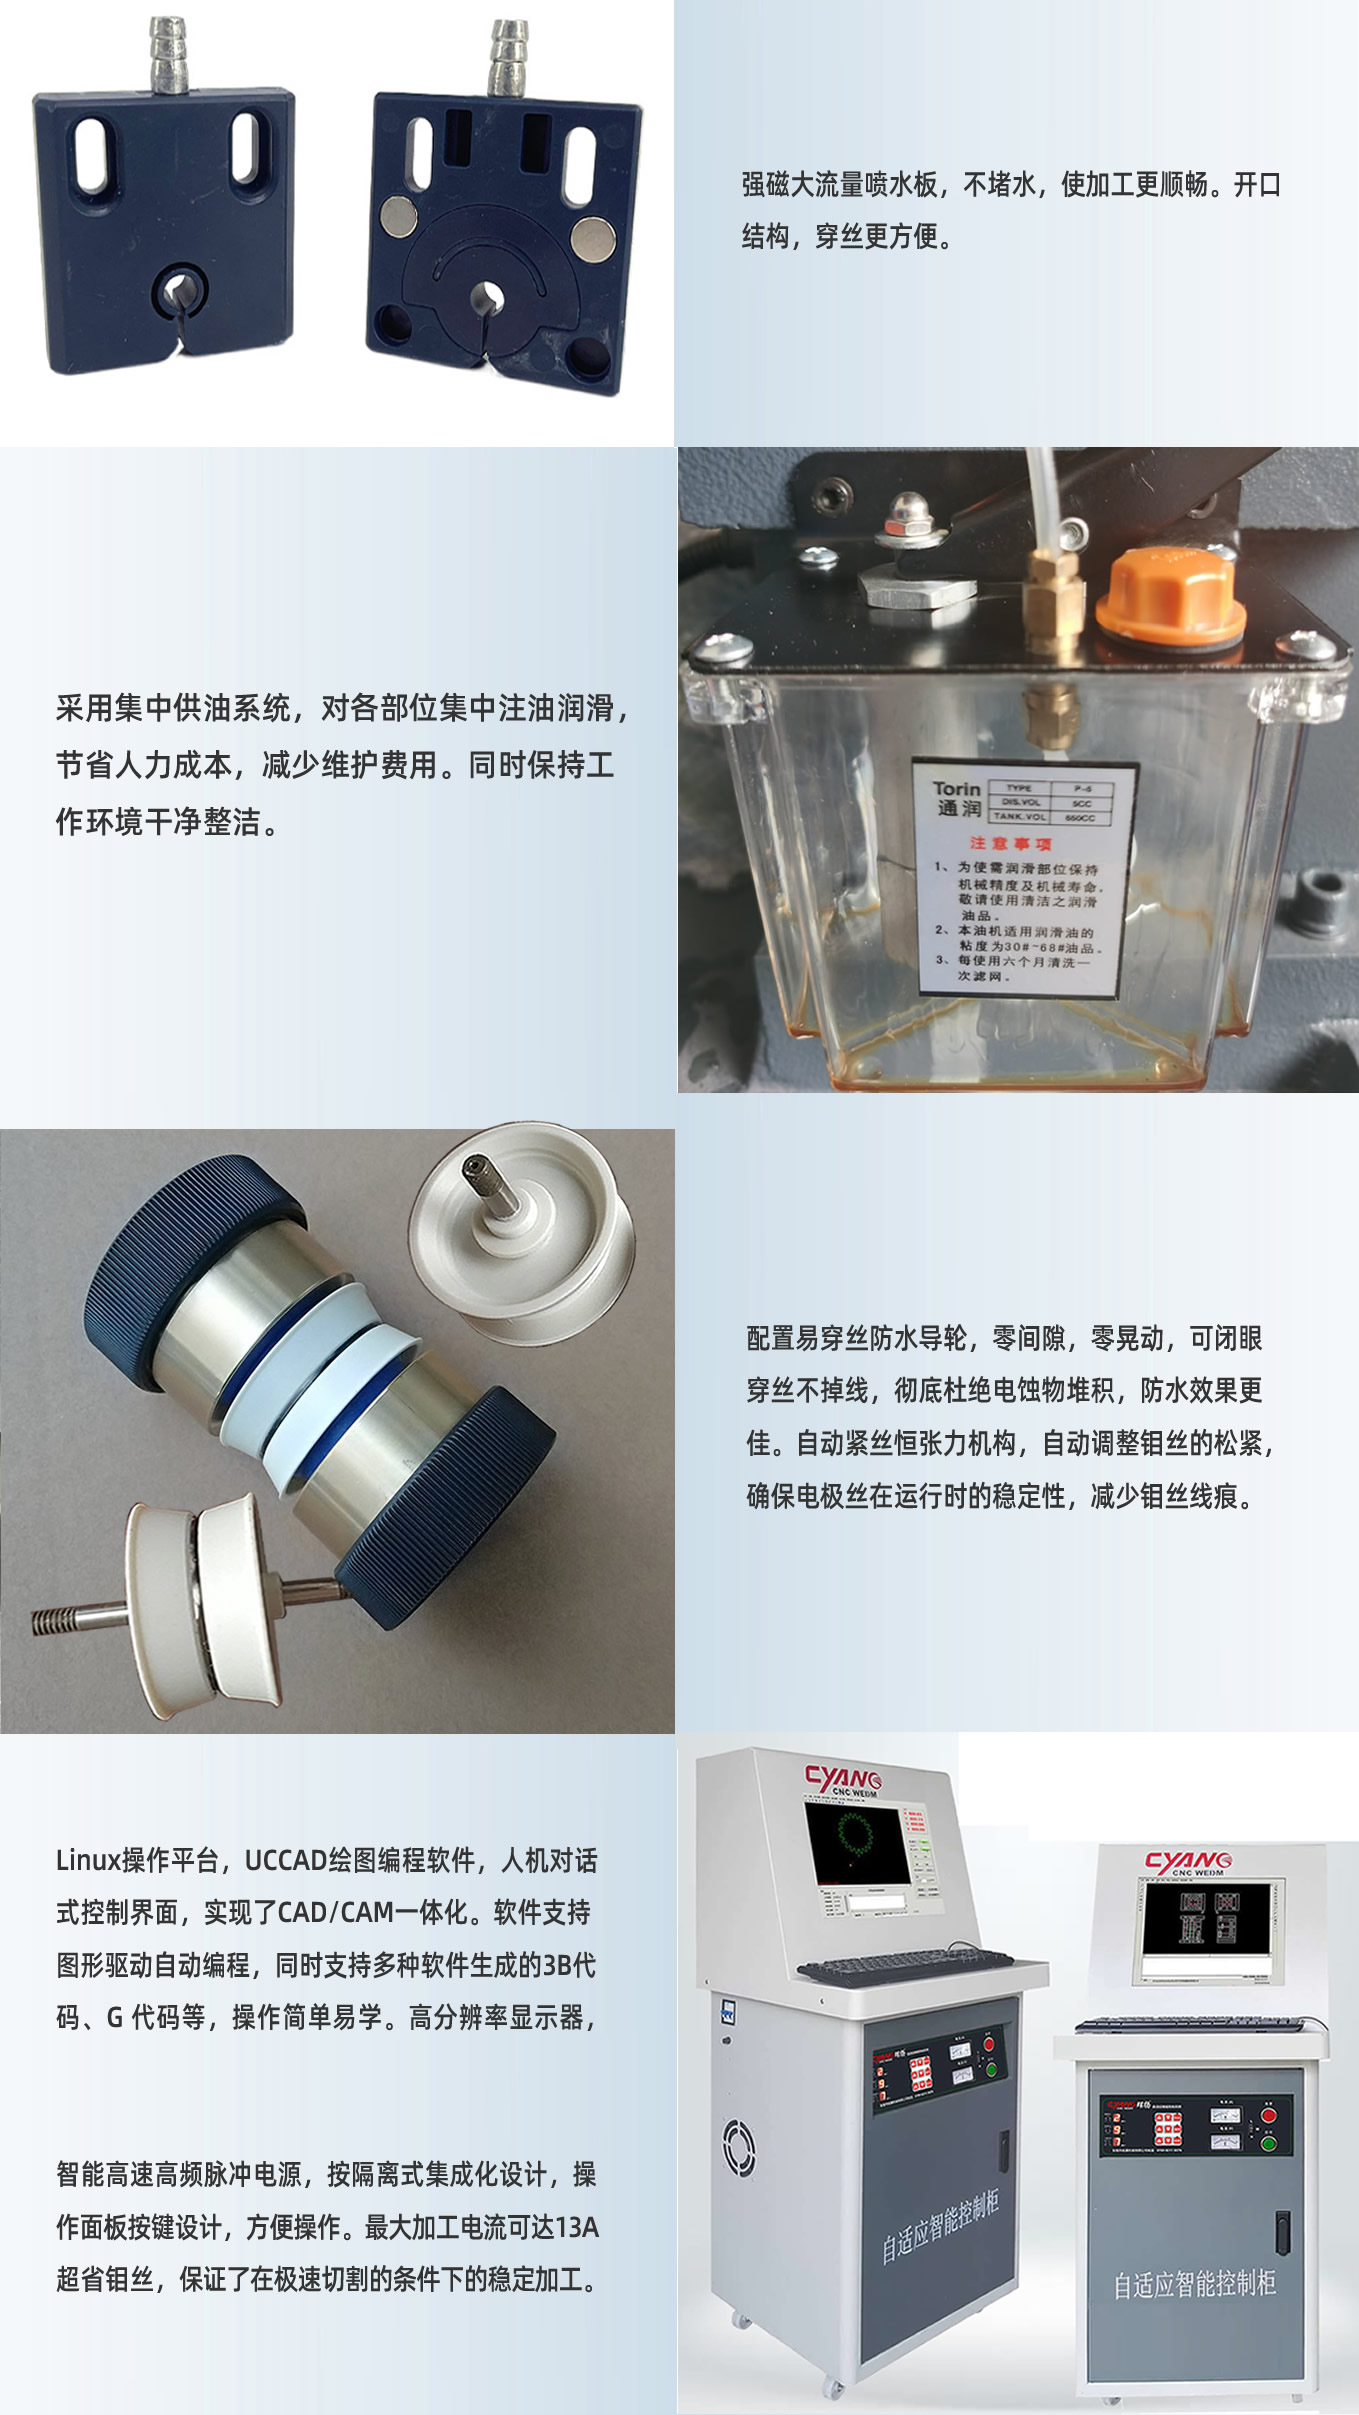 Supply of Chenyang CNC electric spark wire cutting machine tool DK7745 high-speed fast wire cutting machine